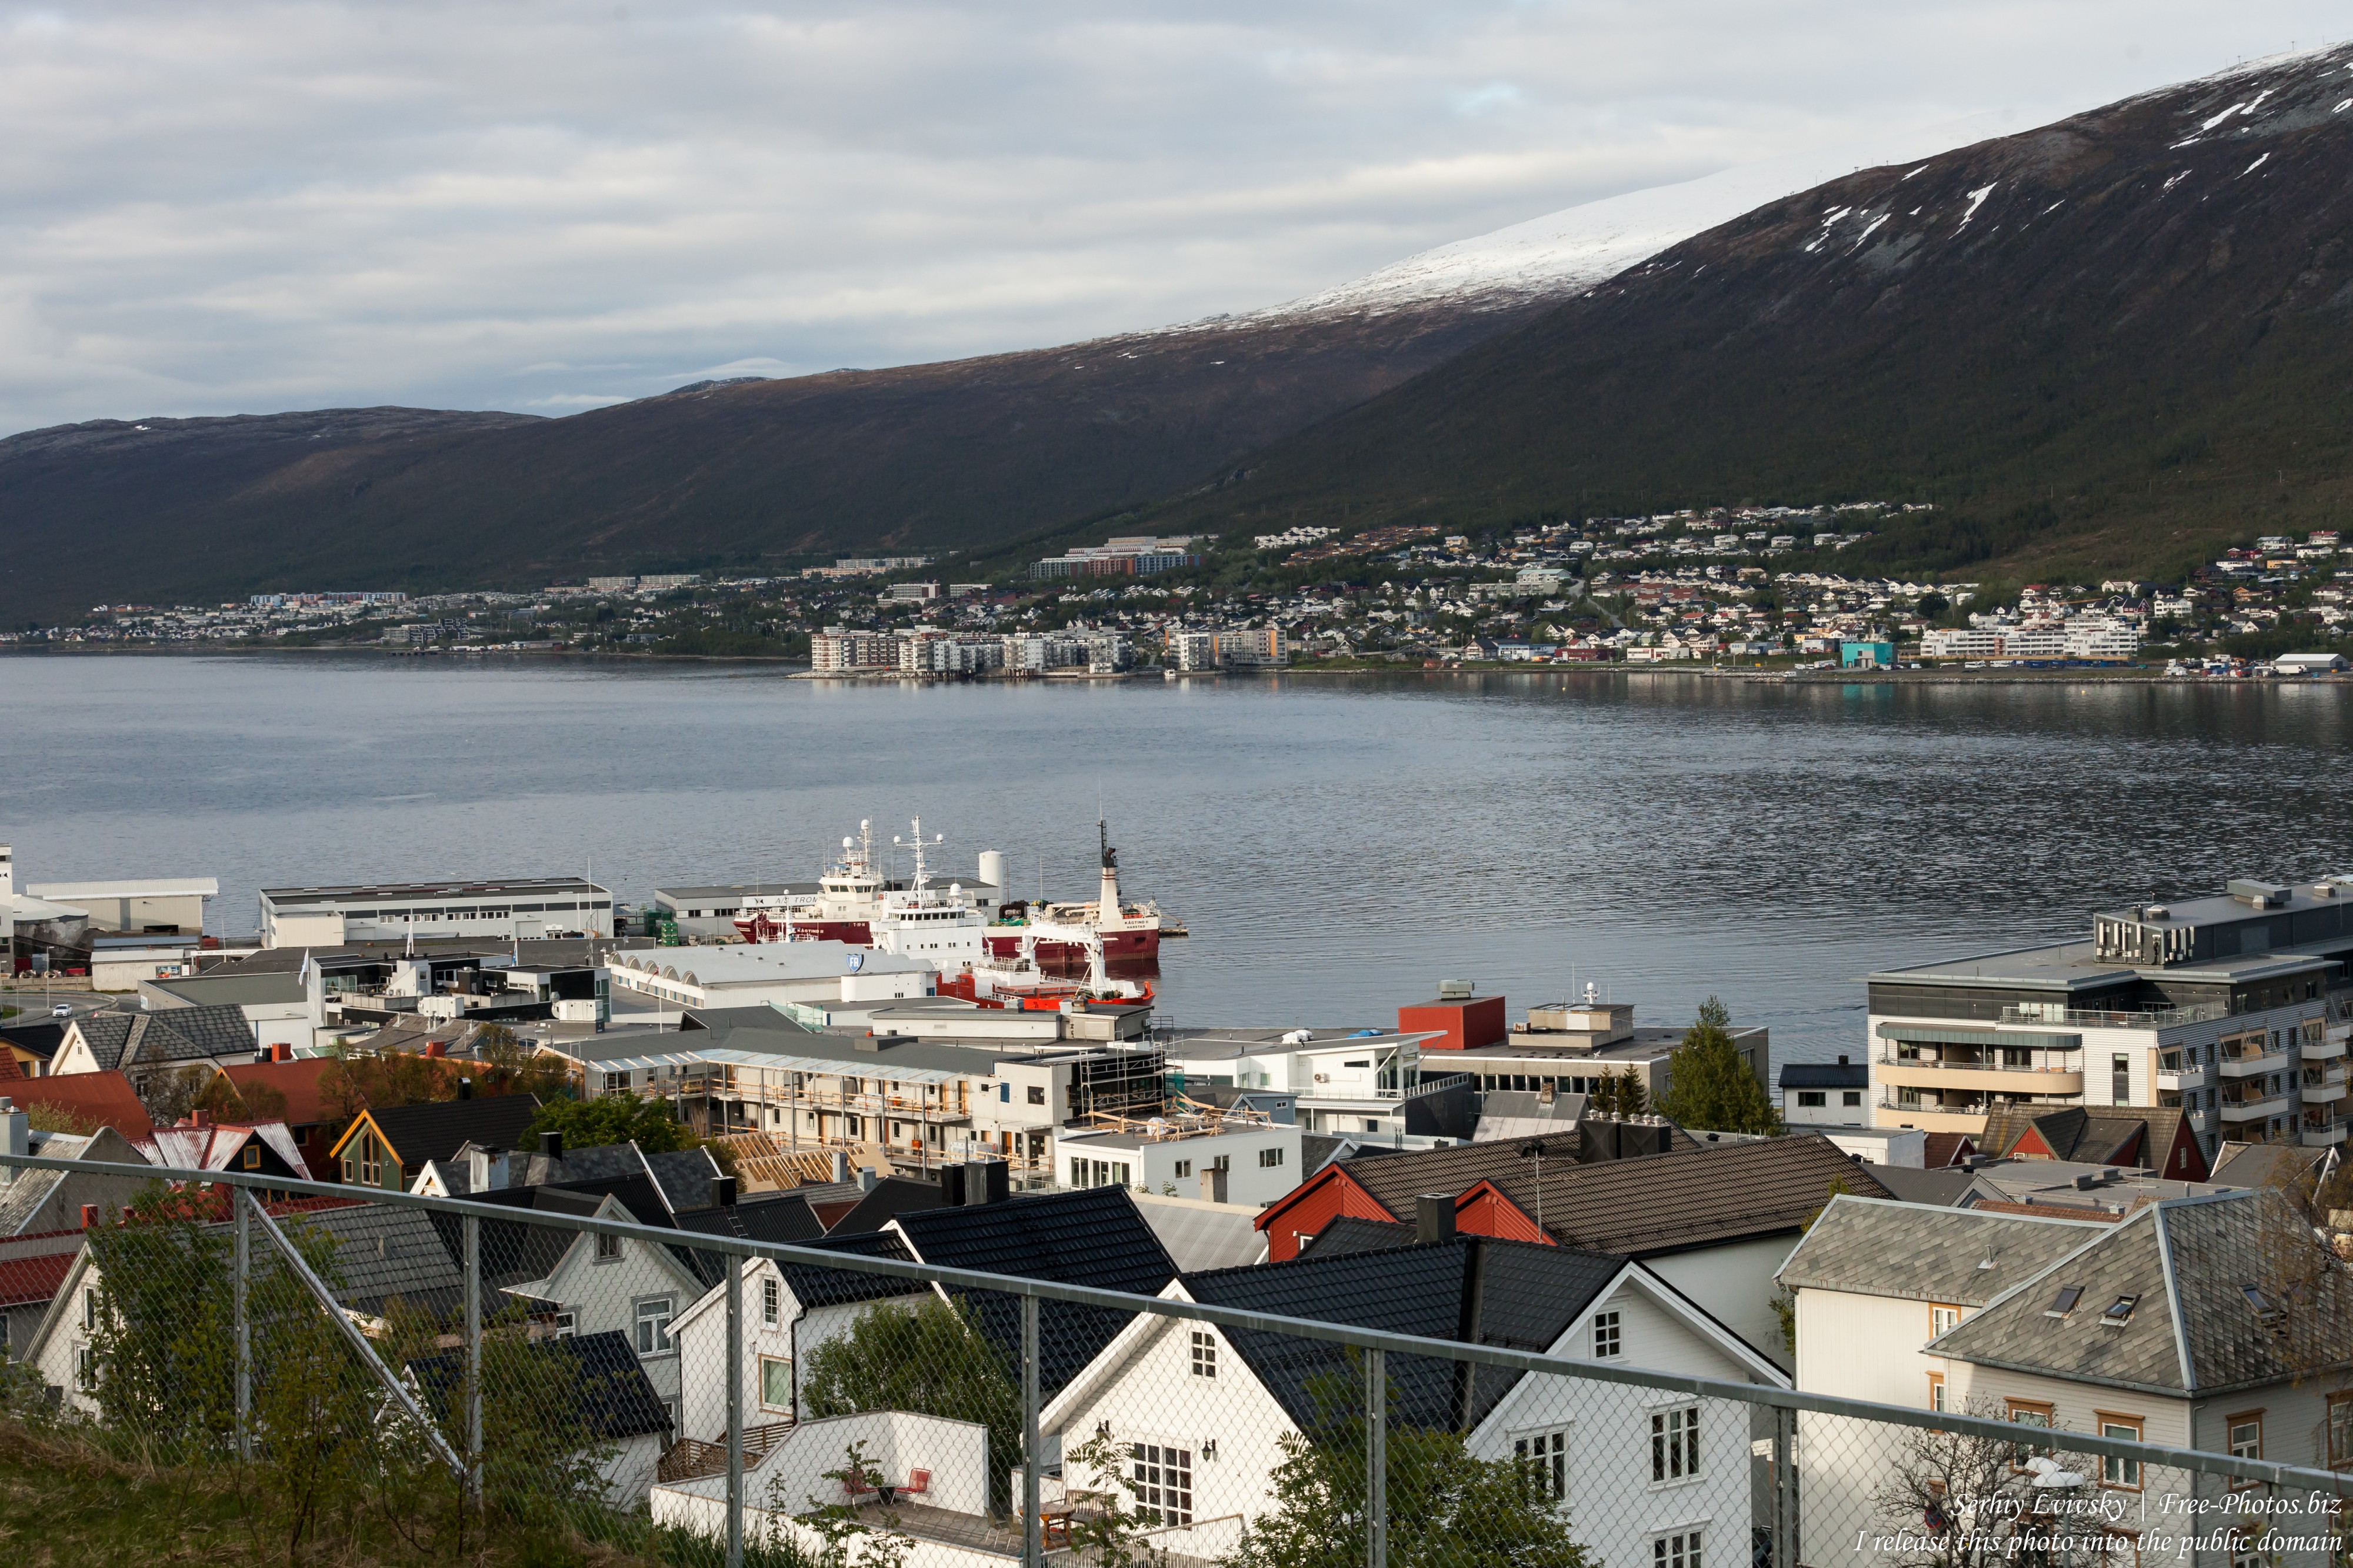 Tromso, Norway, photographed in June 2018 by Serhiy Lvivsky, picture 70